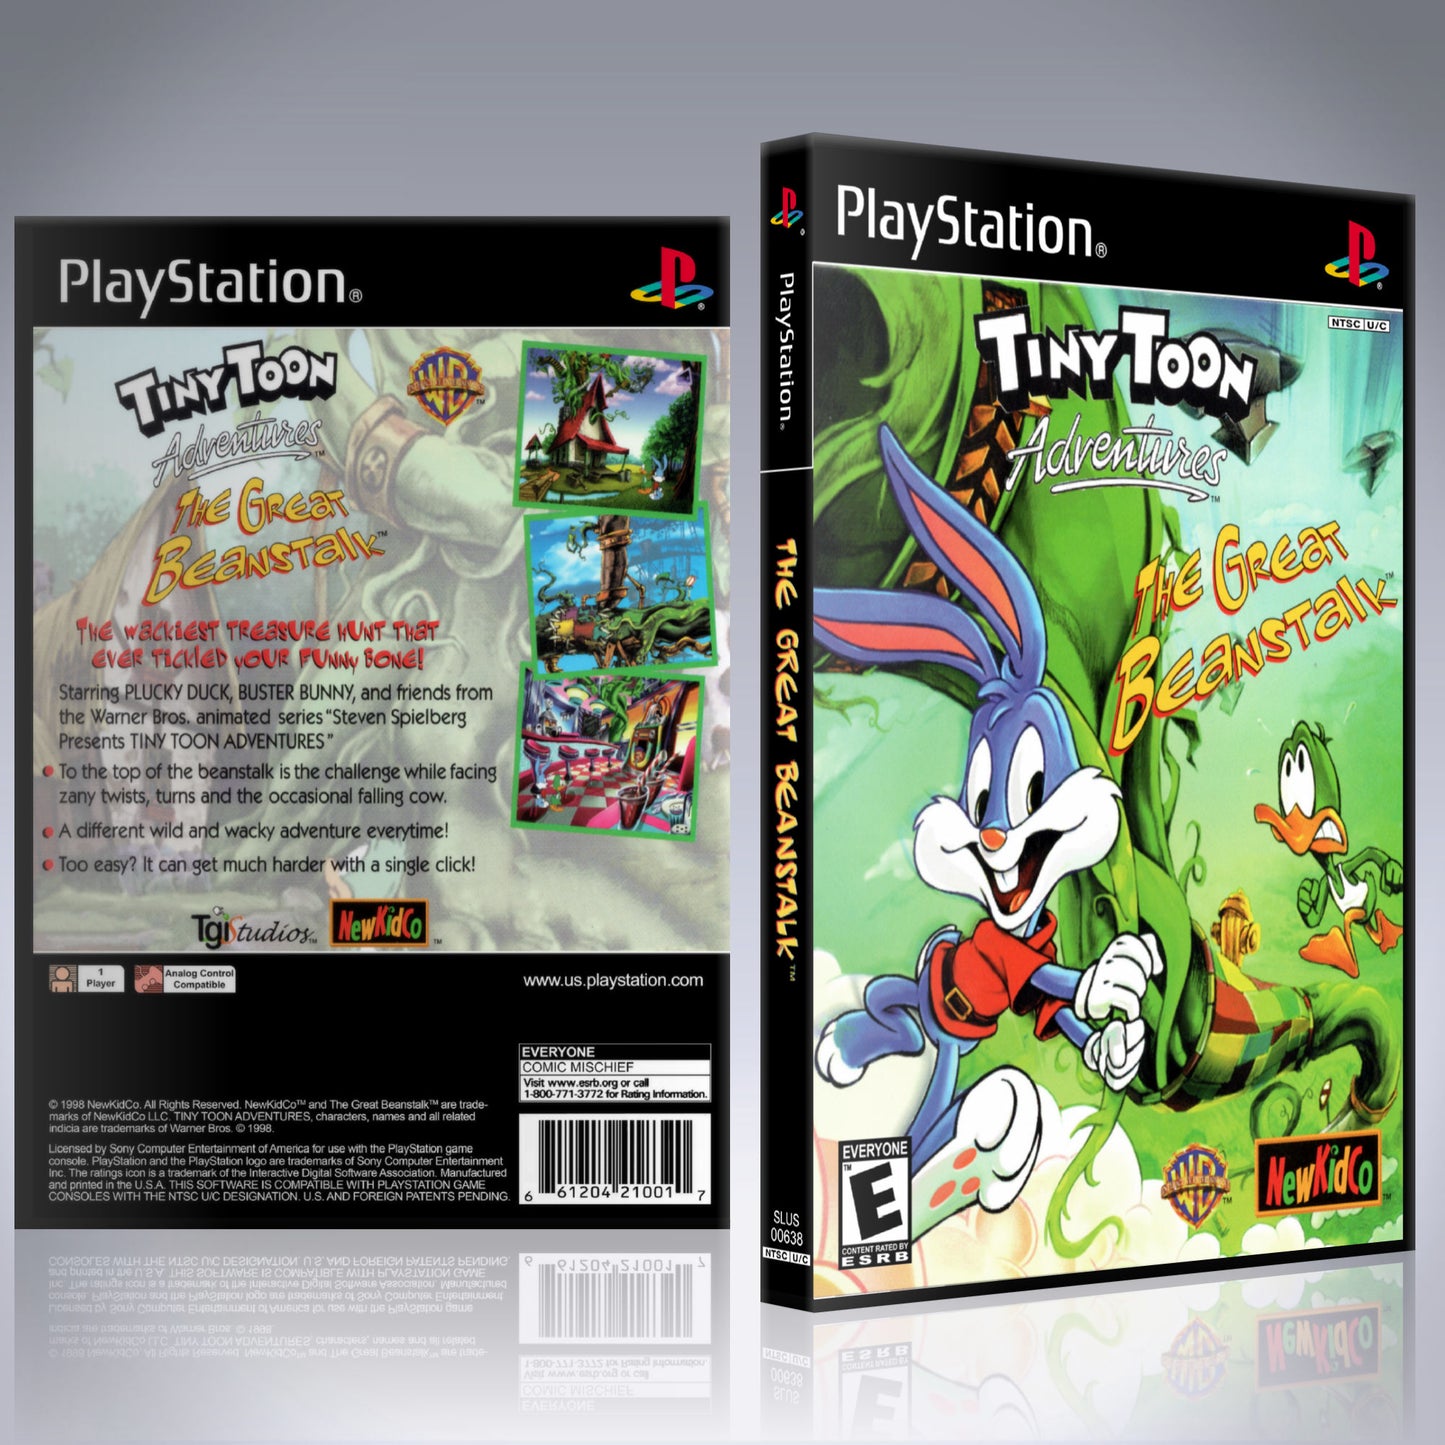 PS1 Case - NO GAME - Tiny Toon Adventures - The Great Beanstalk